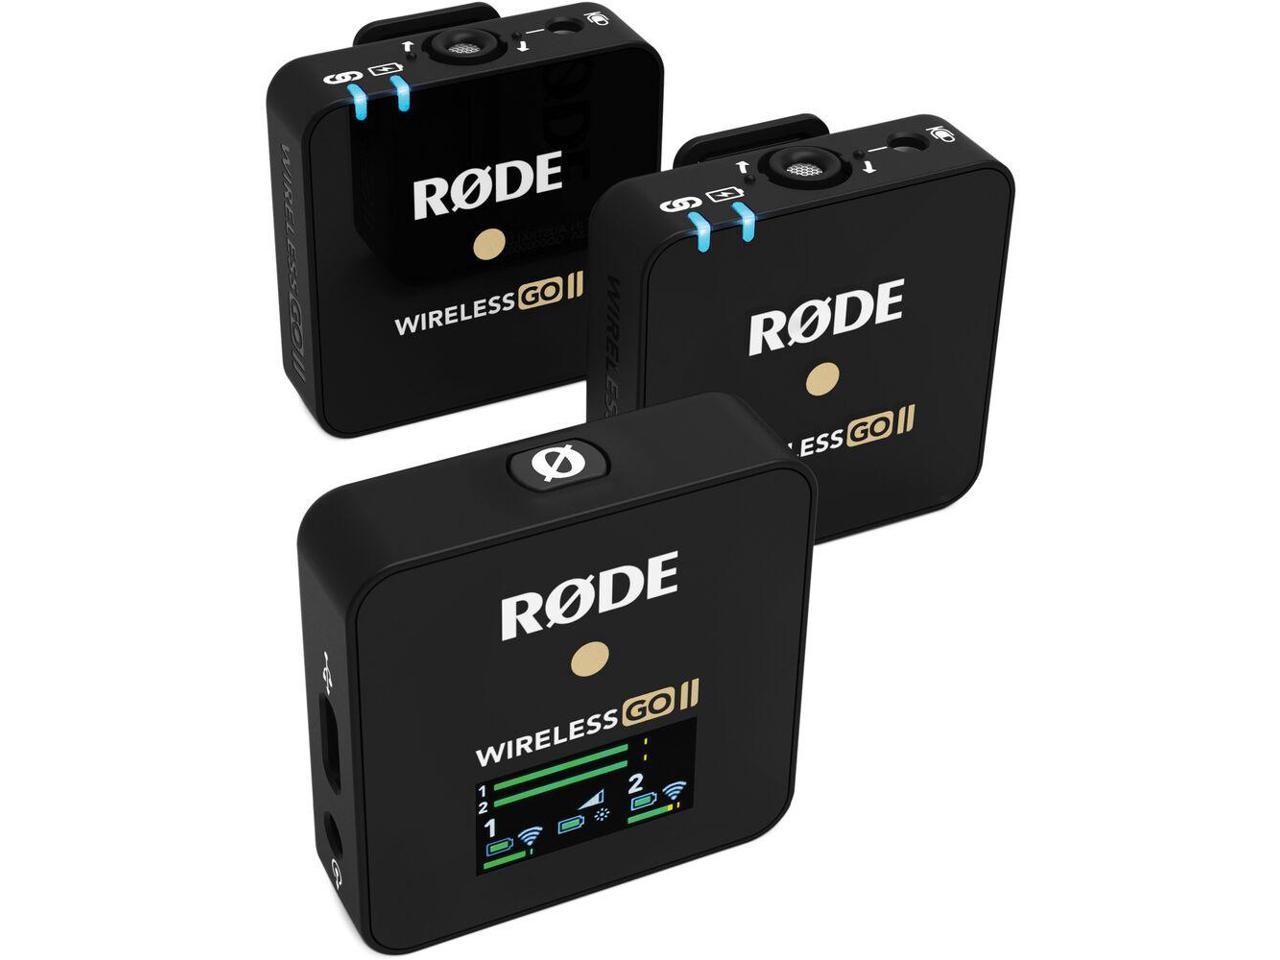 Rode Wireless GO II 2-Person Compact Digital Wireless Microphone System/Recorder Bundle with ZG-R30 Charging Case for Rode Wireless GO/Wireless GO II Microphone System 